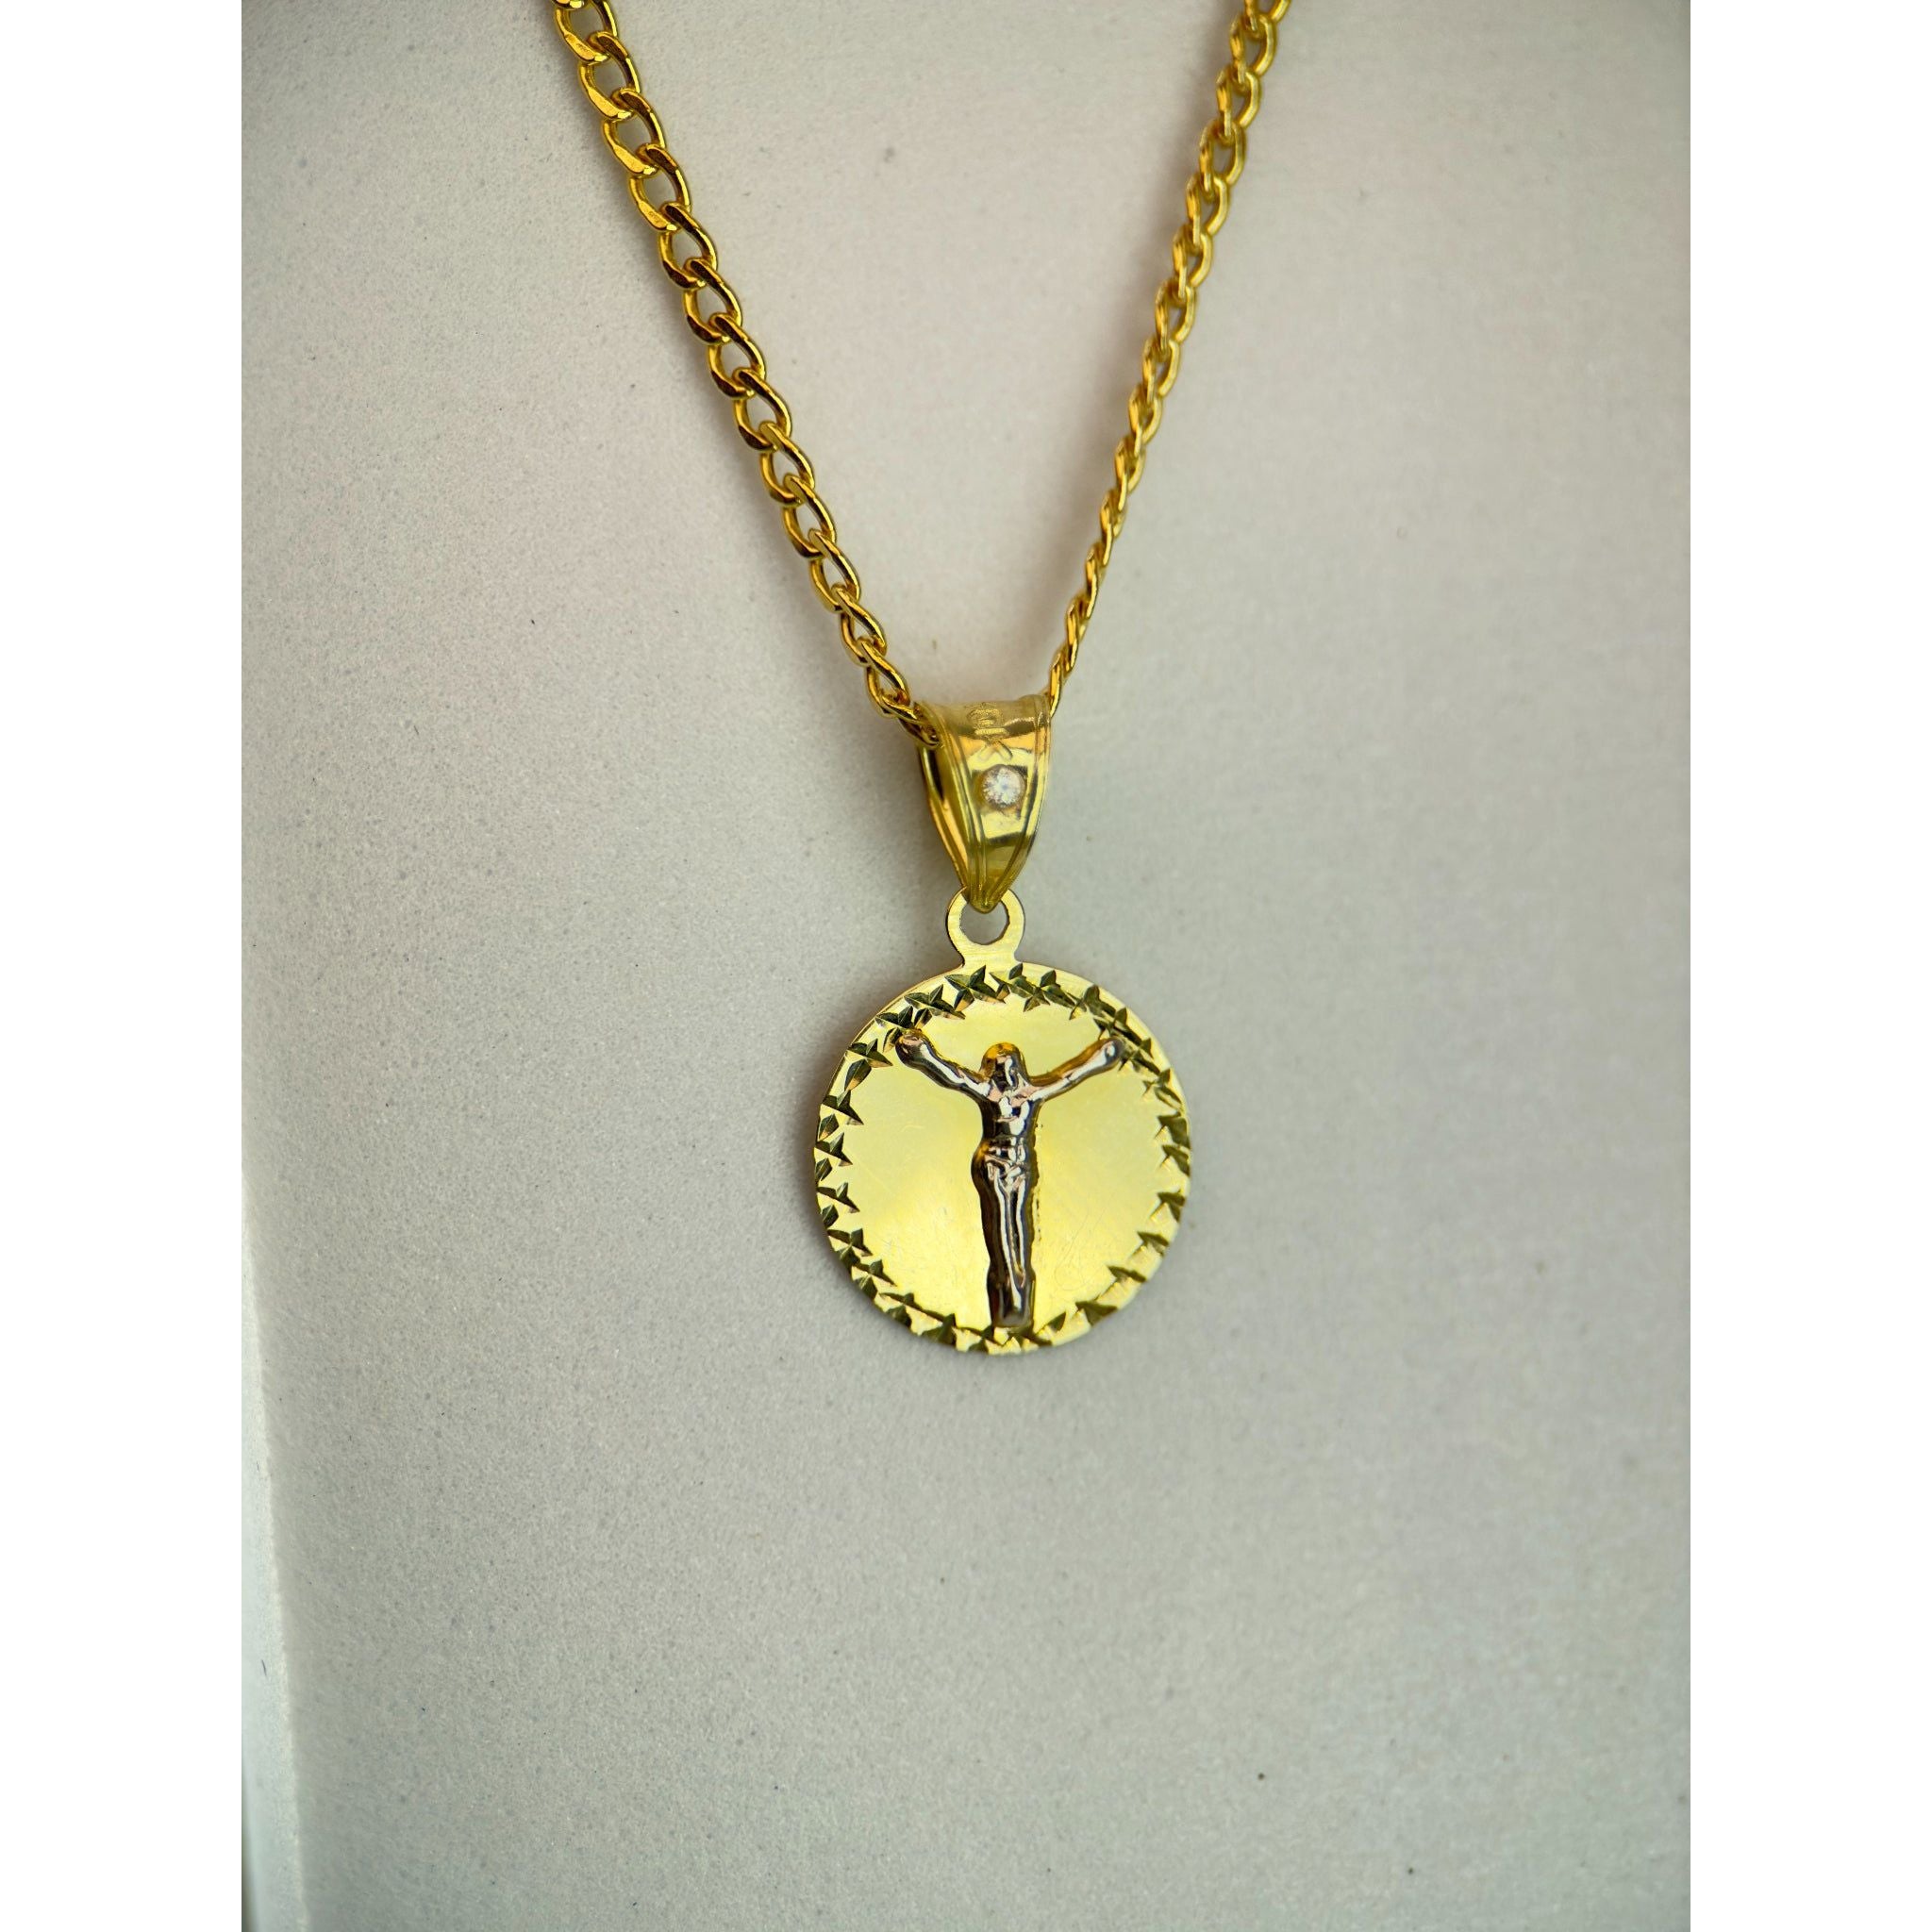 DR1934 - 10K Yellow Gold - Gold Chain & Charm - Jesus